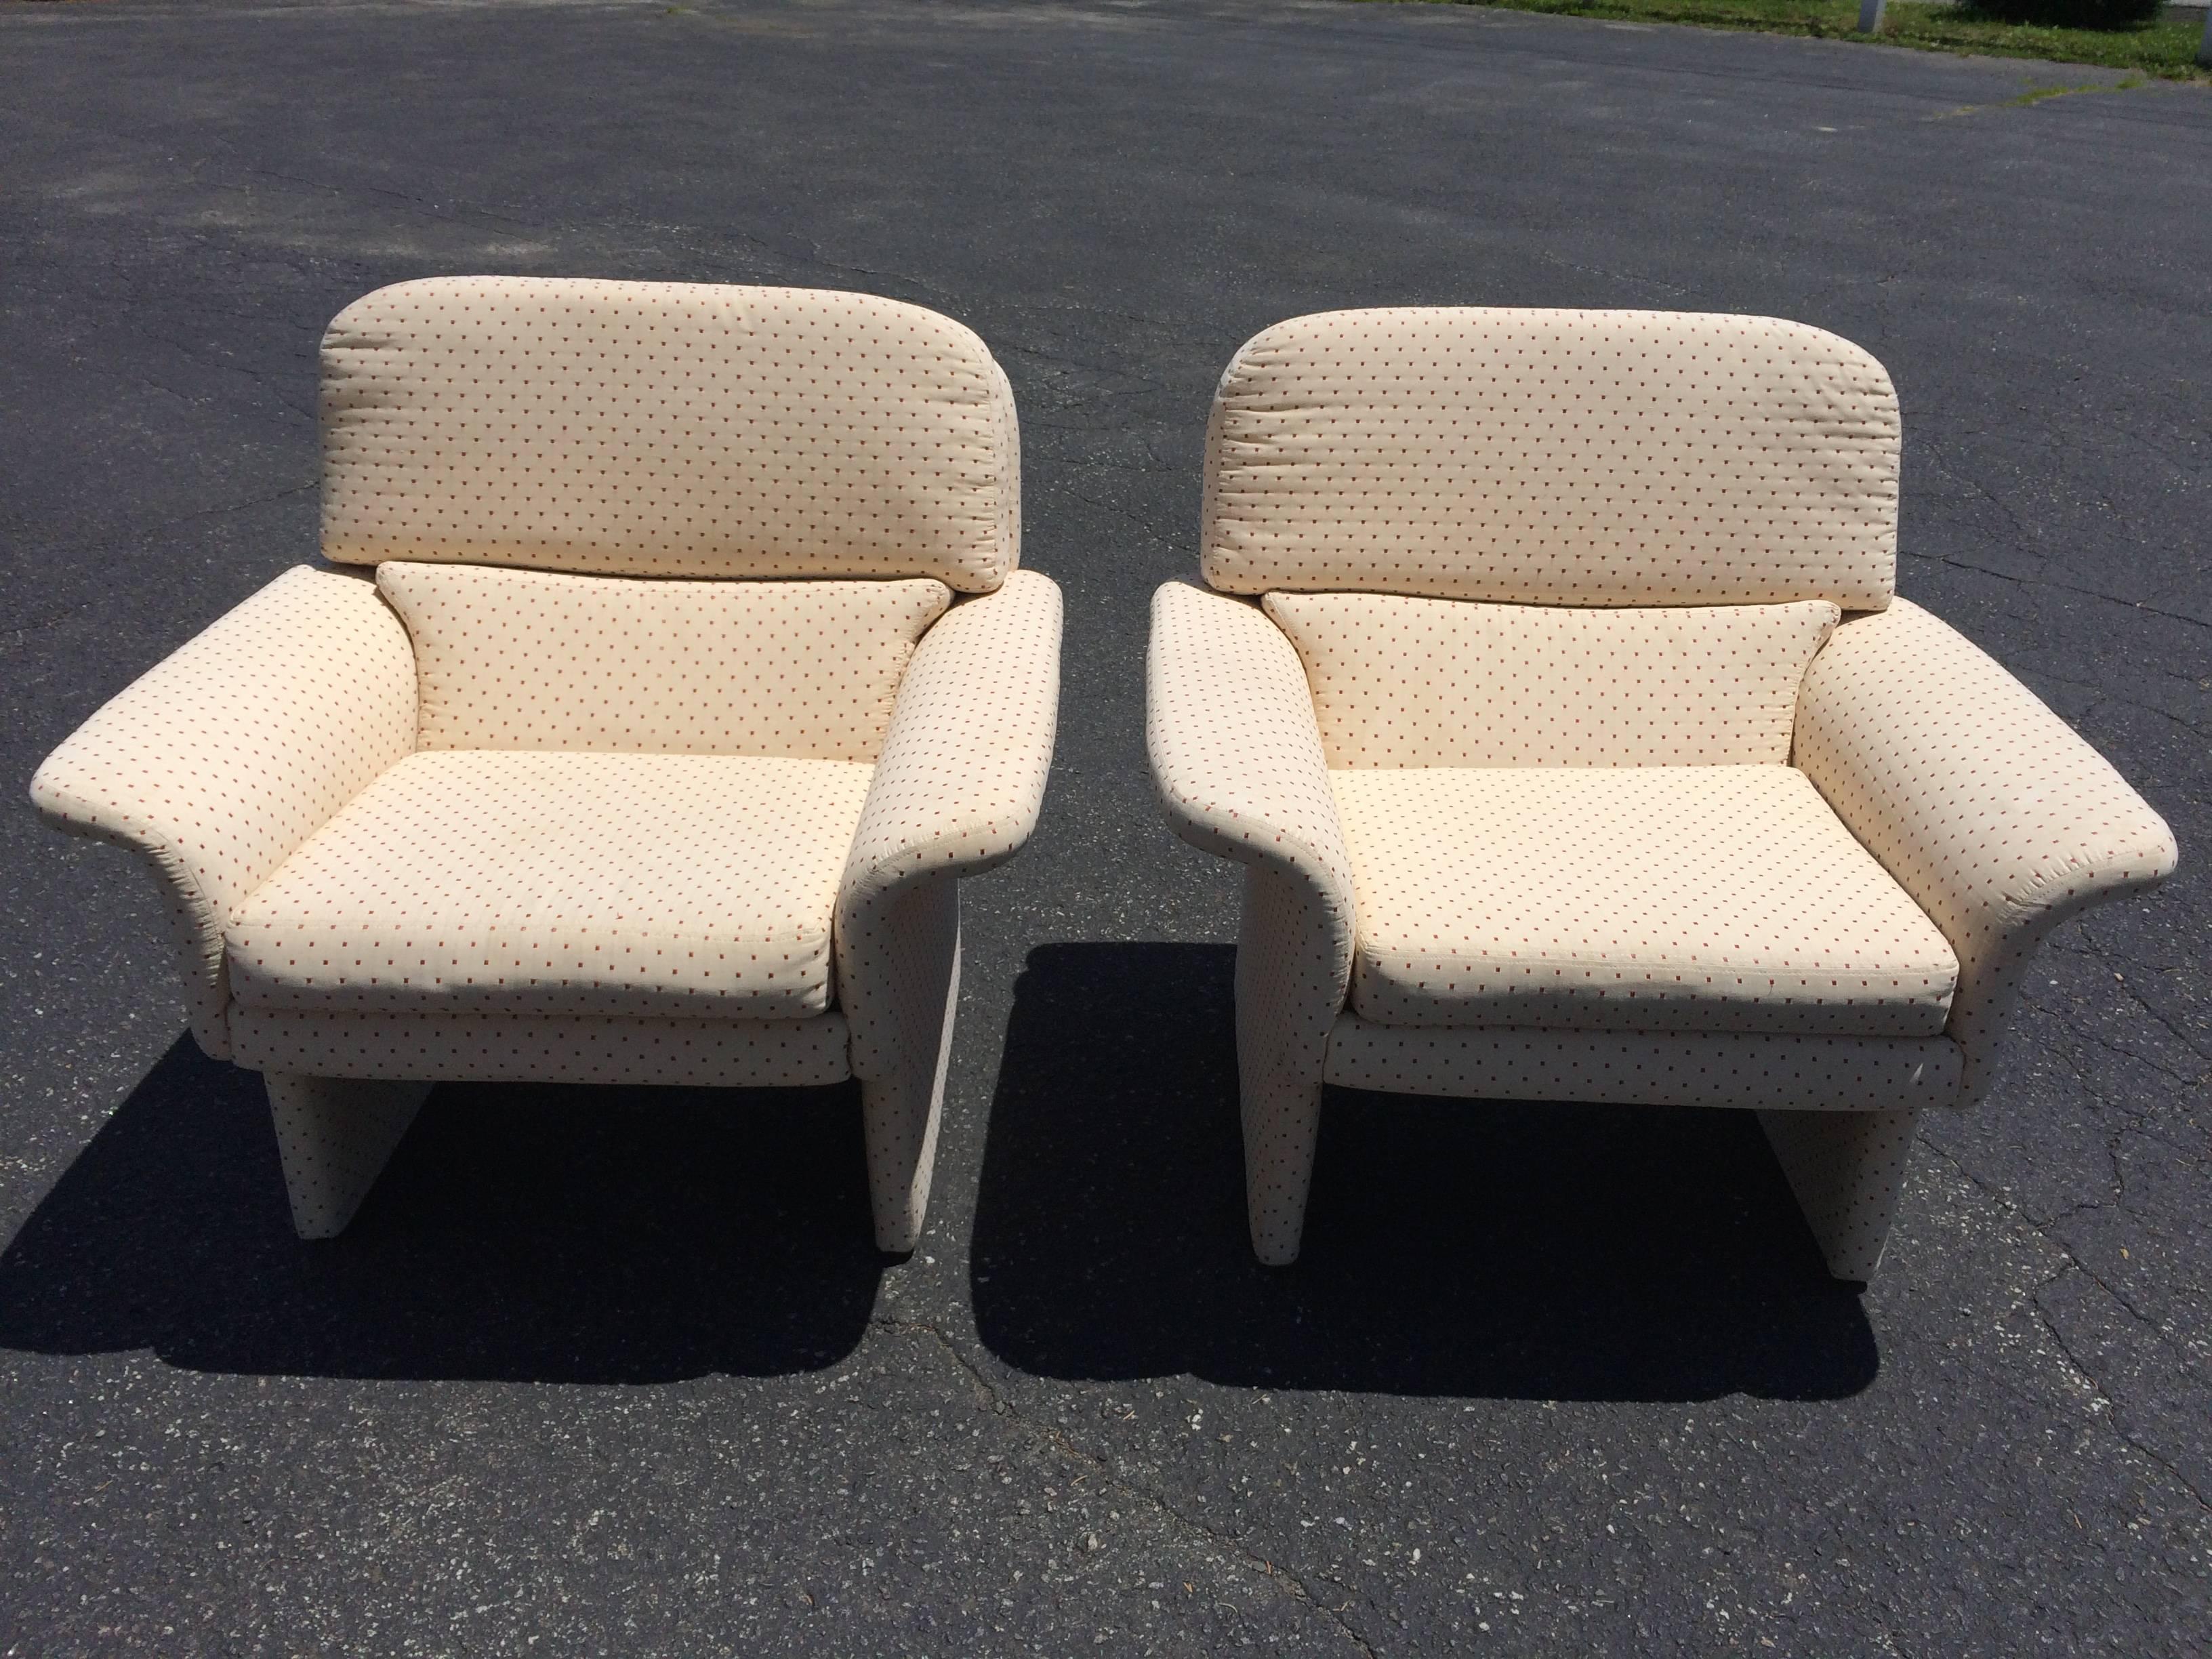 Pair of 1980's Saporiti Style Modular Lounge Chairs.. Super comfortable with a modern flair. Seat cushions are removable but back cushions are connected. Some small slight stains but fabulous modular shape. Would look great in a geometric fabric. No